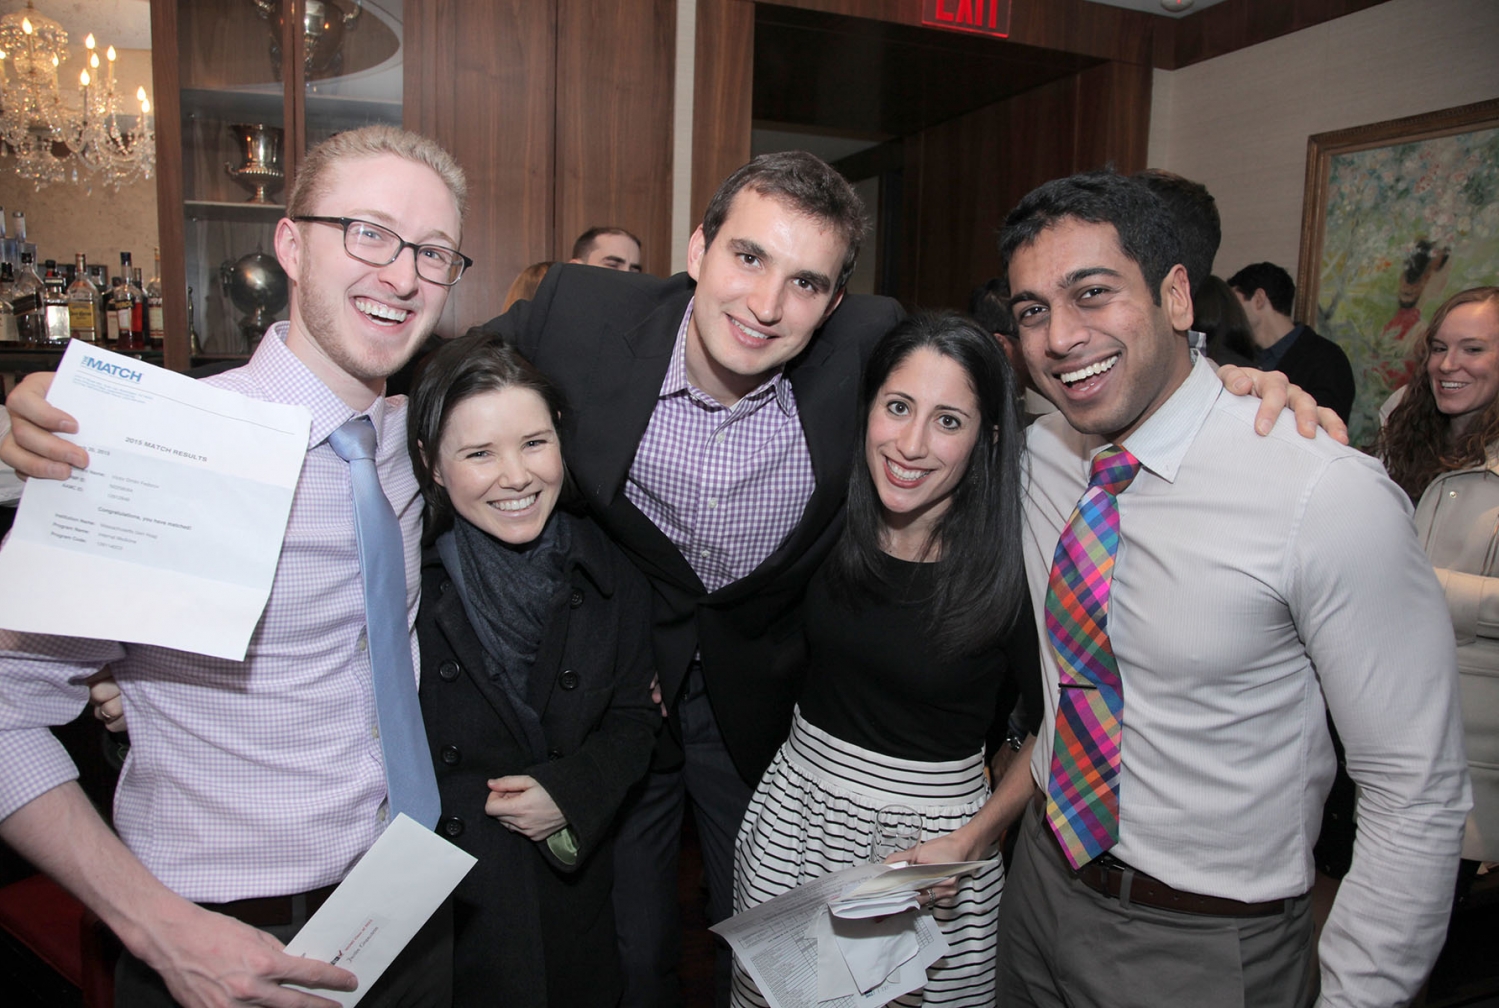 Graduating medical students celebrate their residency matches during Match Day. From left to right: Justin Granstein, Rachel Niece, Victor Fedorov, Ana Pacheco-Navarro and Nikhil Shankar.  All photos: Ira Fox